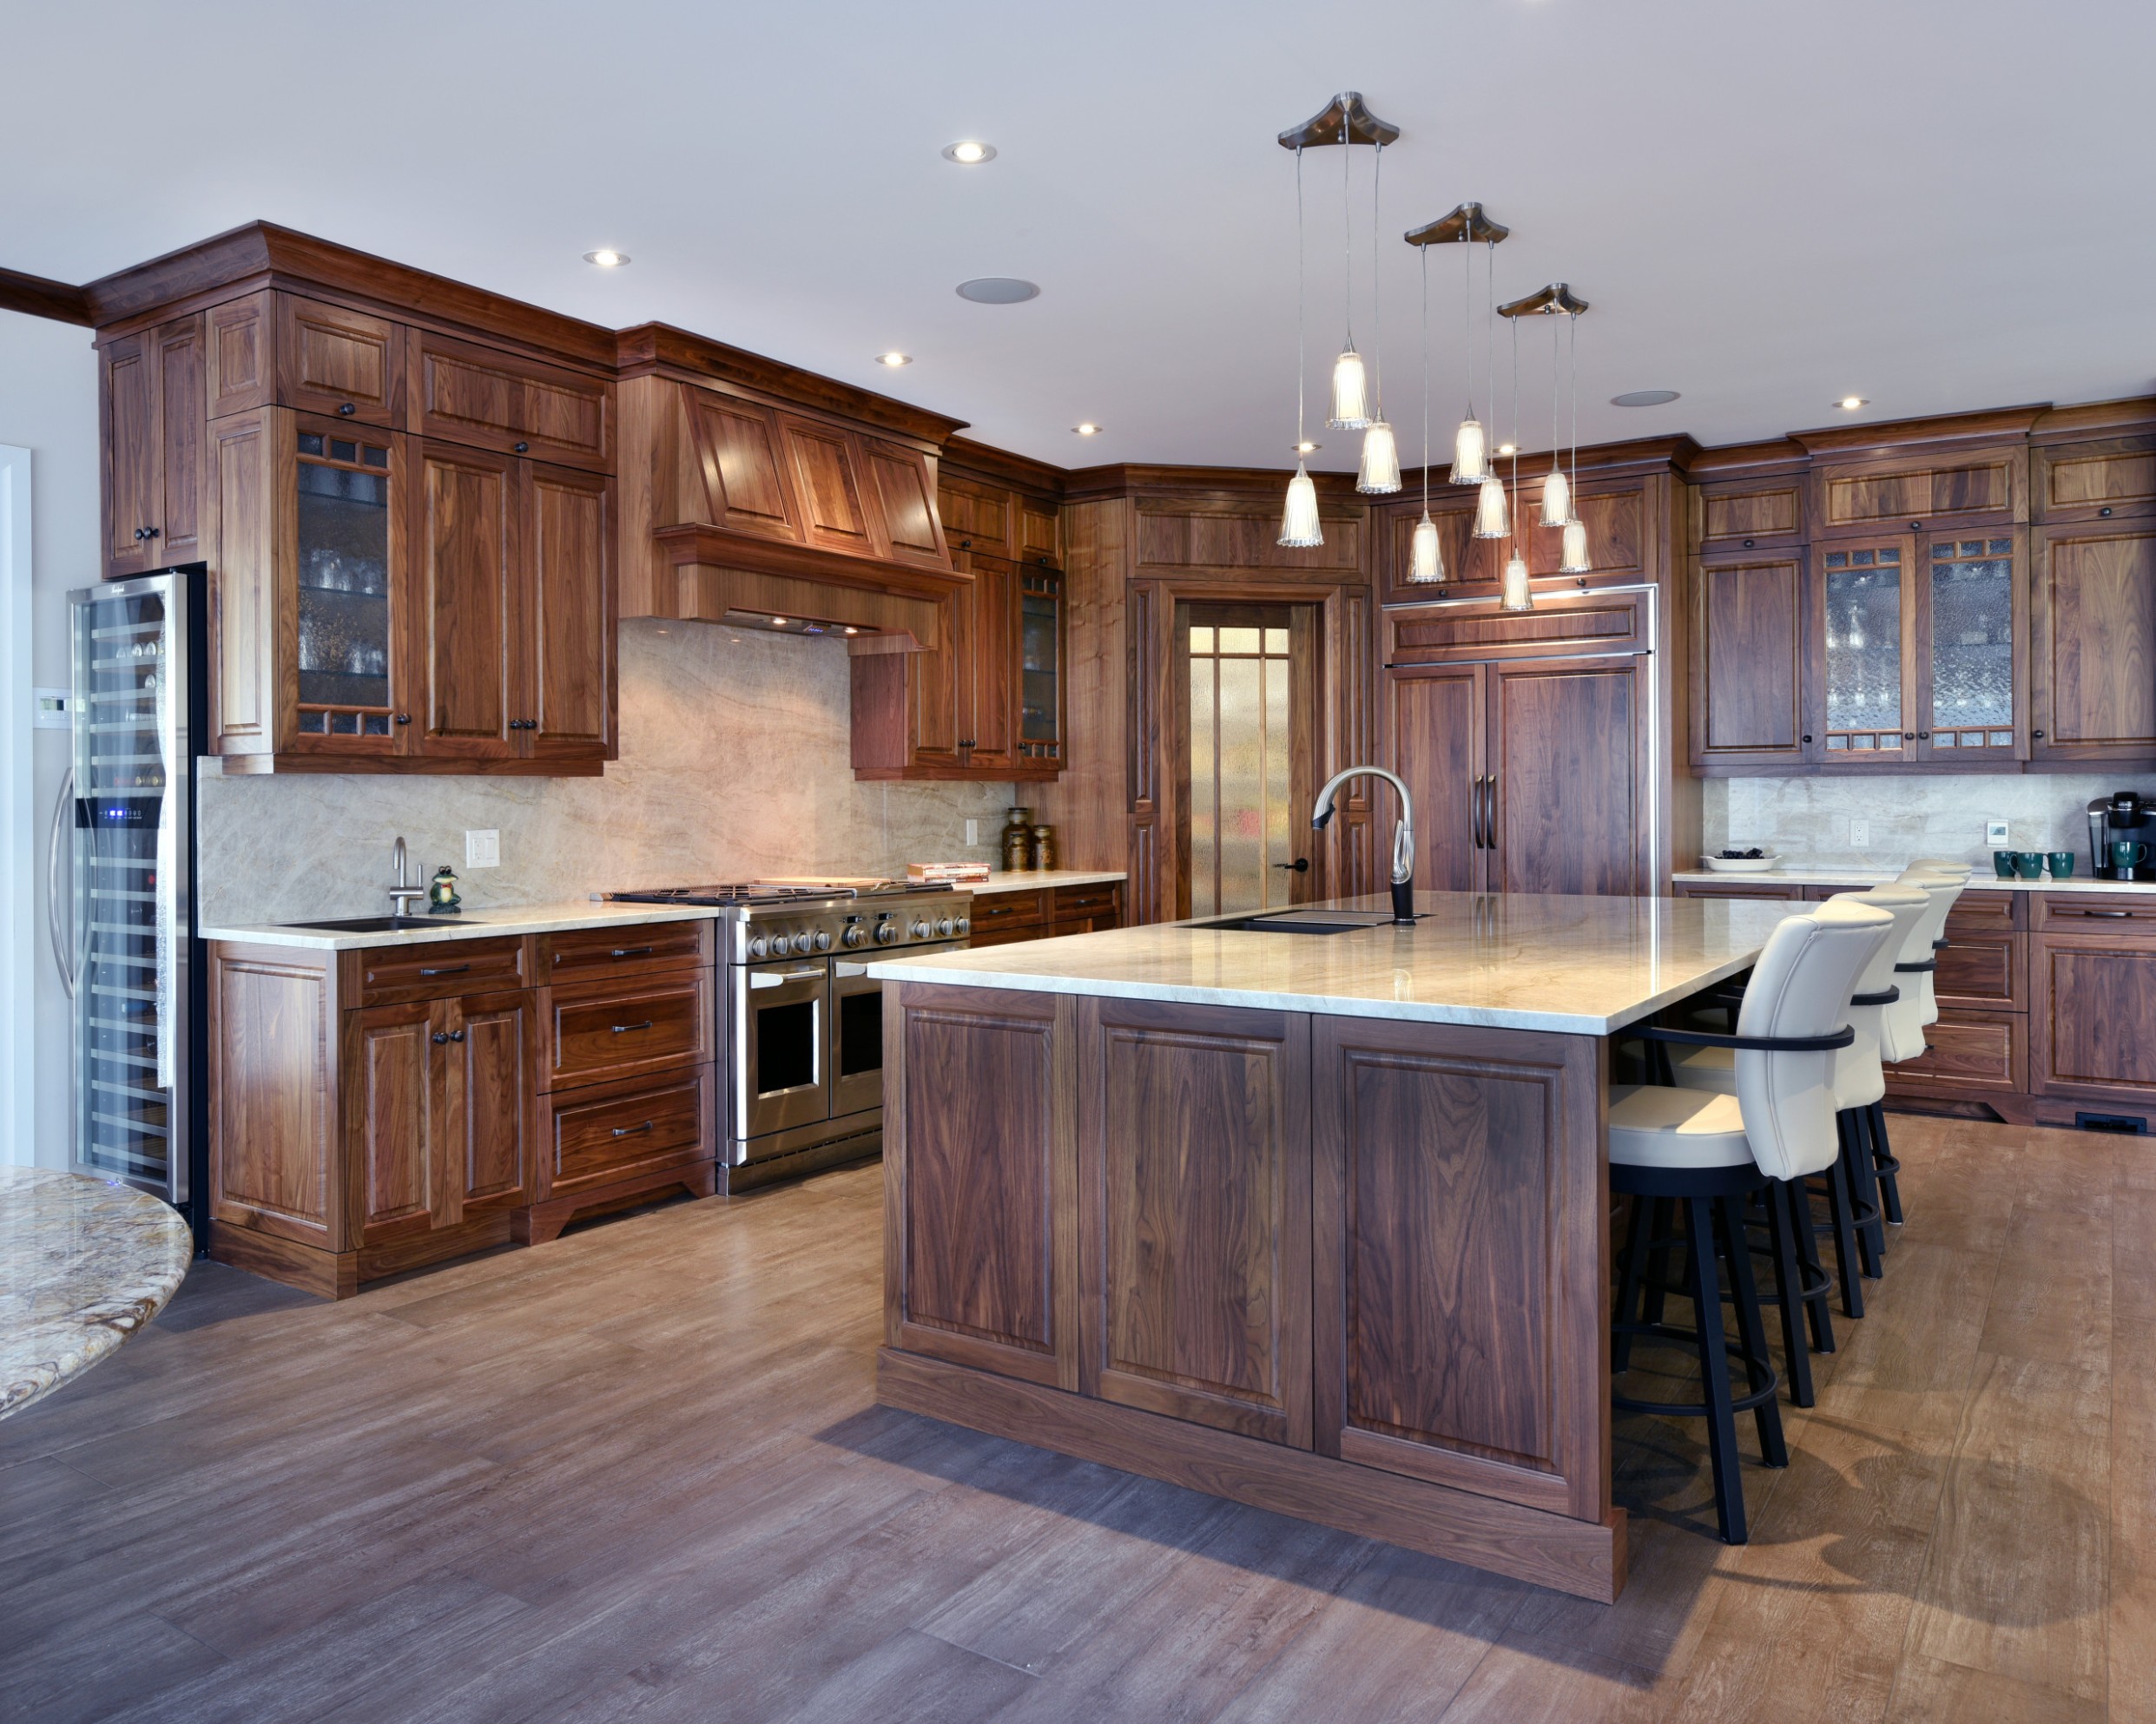 What is Traditional Kitchen Design? - traditional kitchen definition